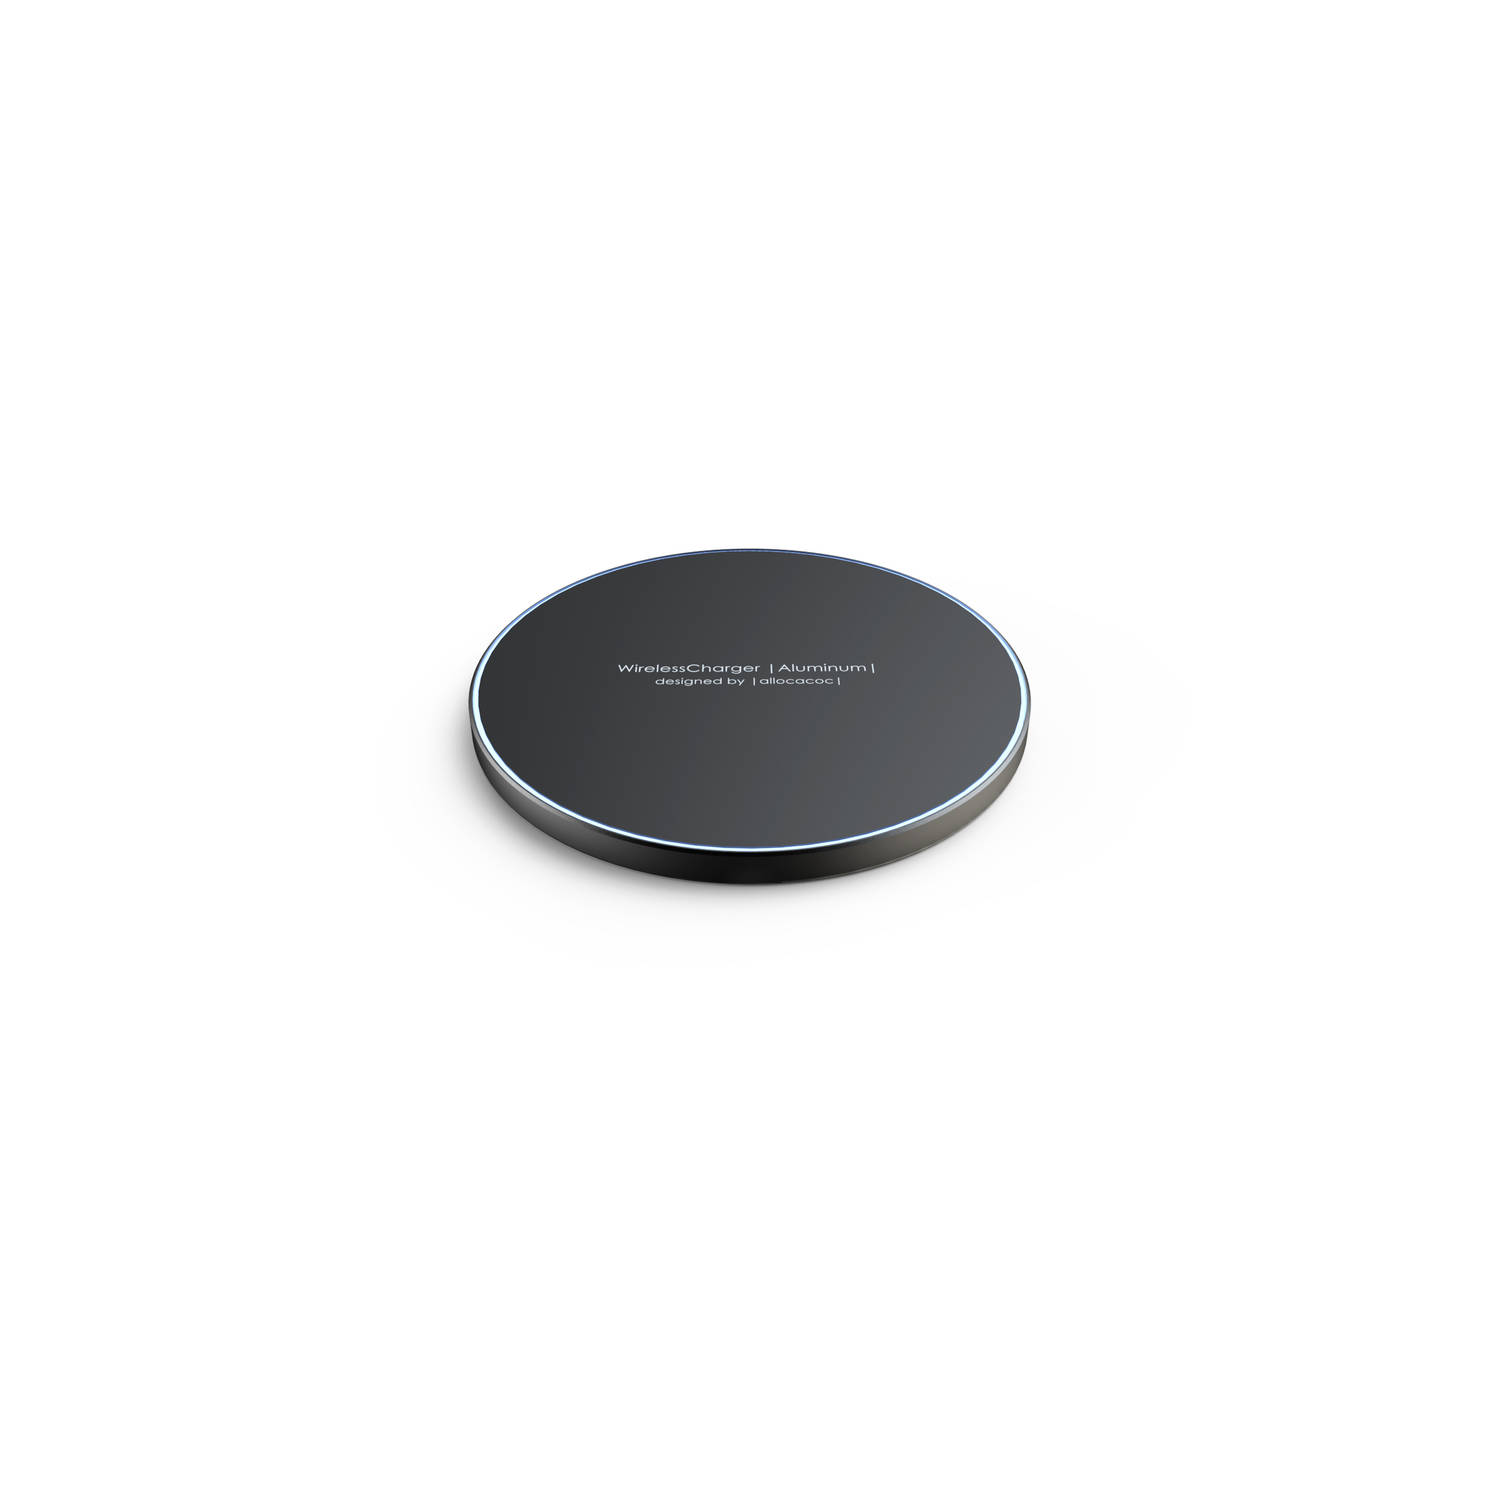 Wireless Charger Aluminum,